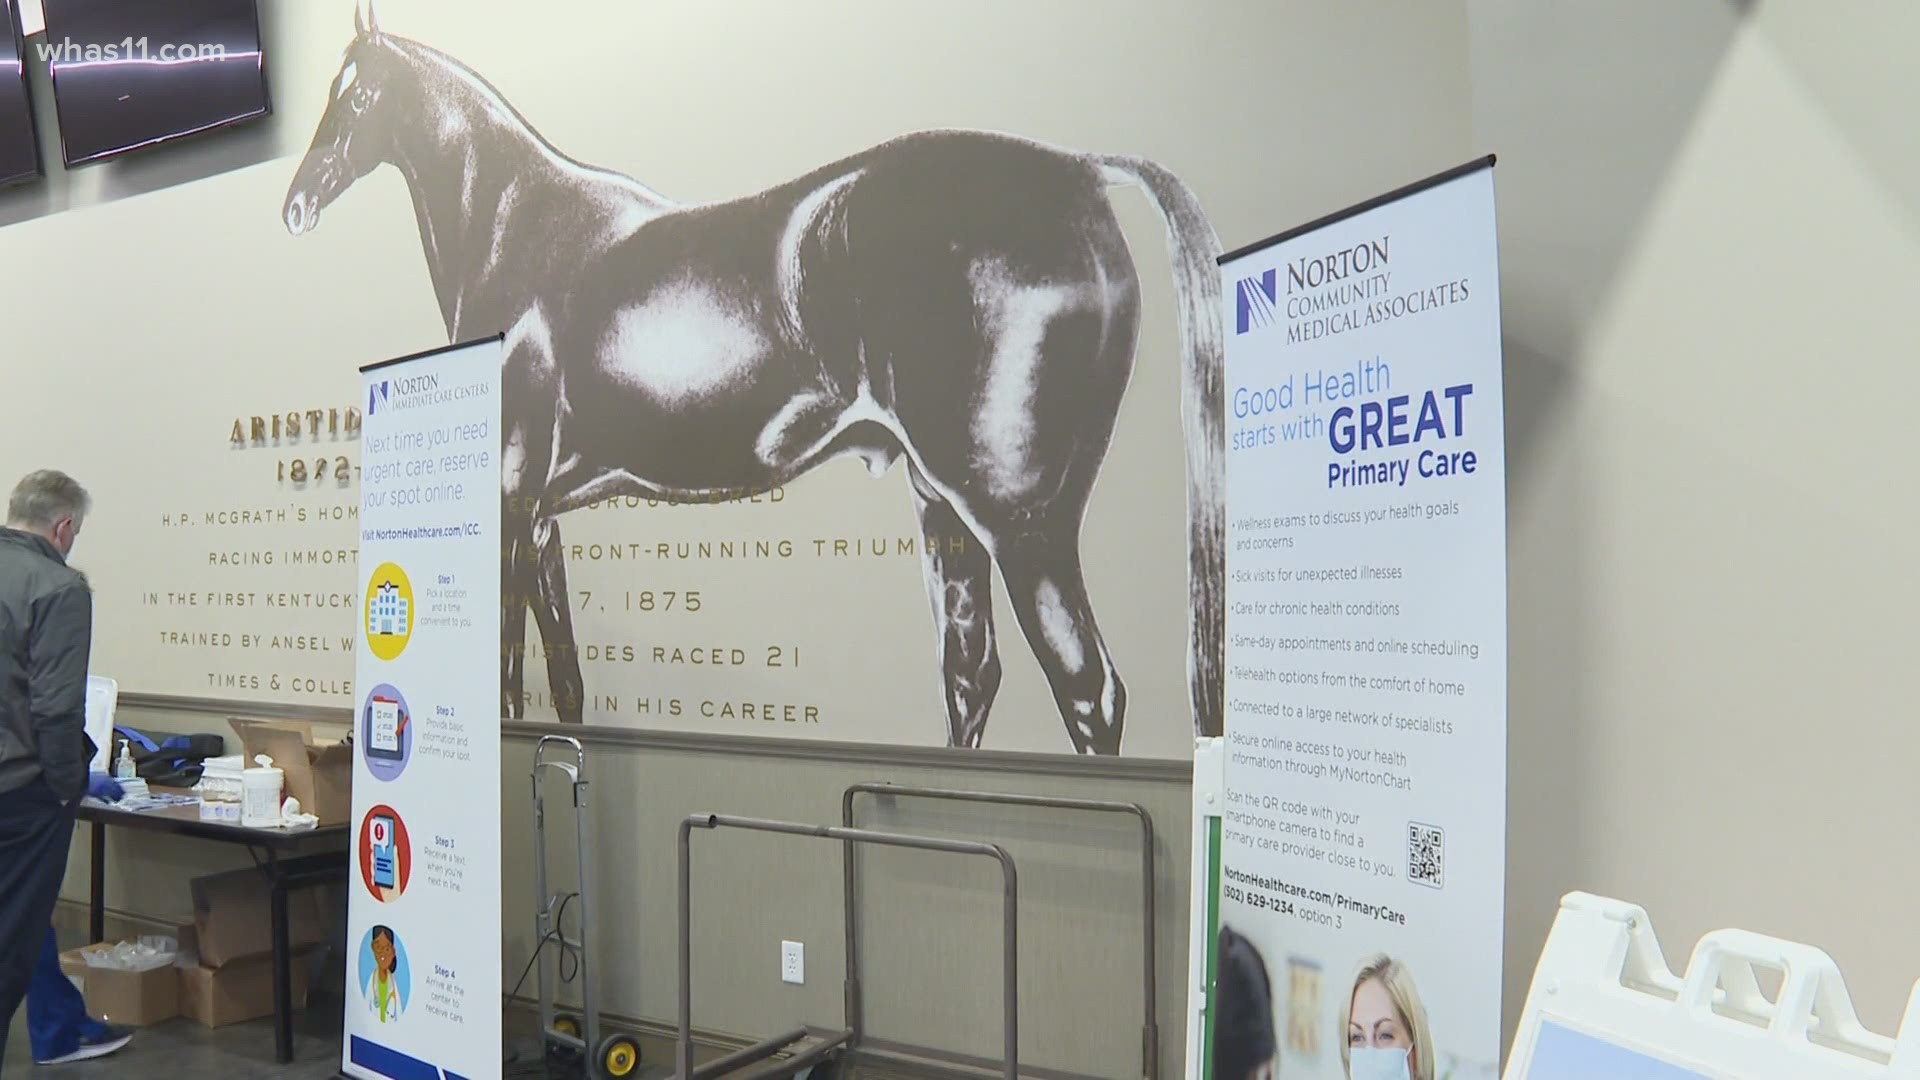 Gov. Beshear is pushing to open more and more COVID vaccine sites across the state to meet the demand, make access easier.